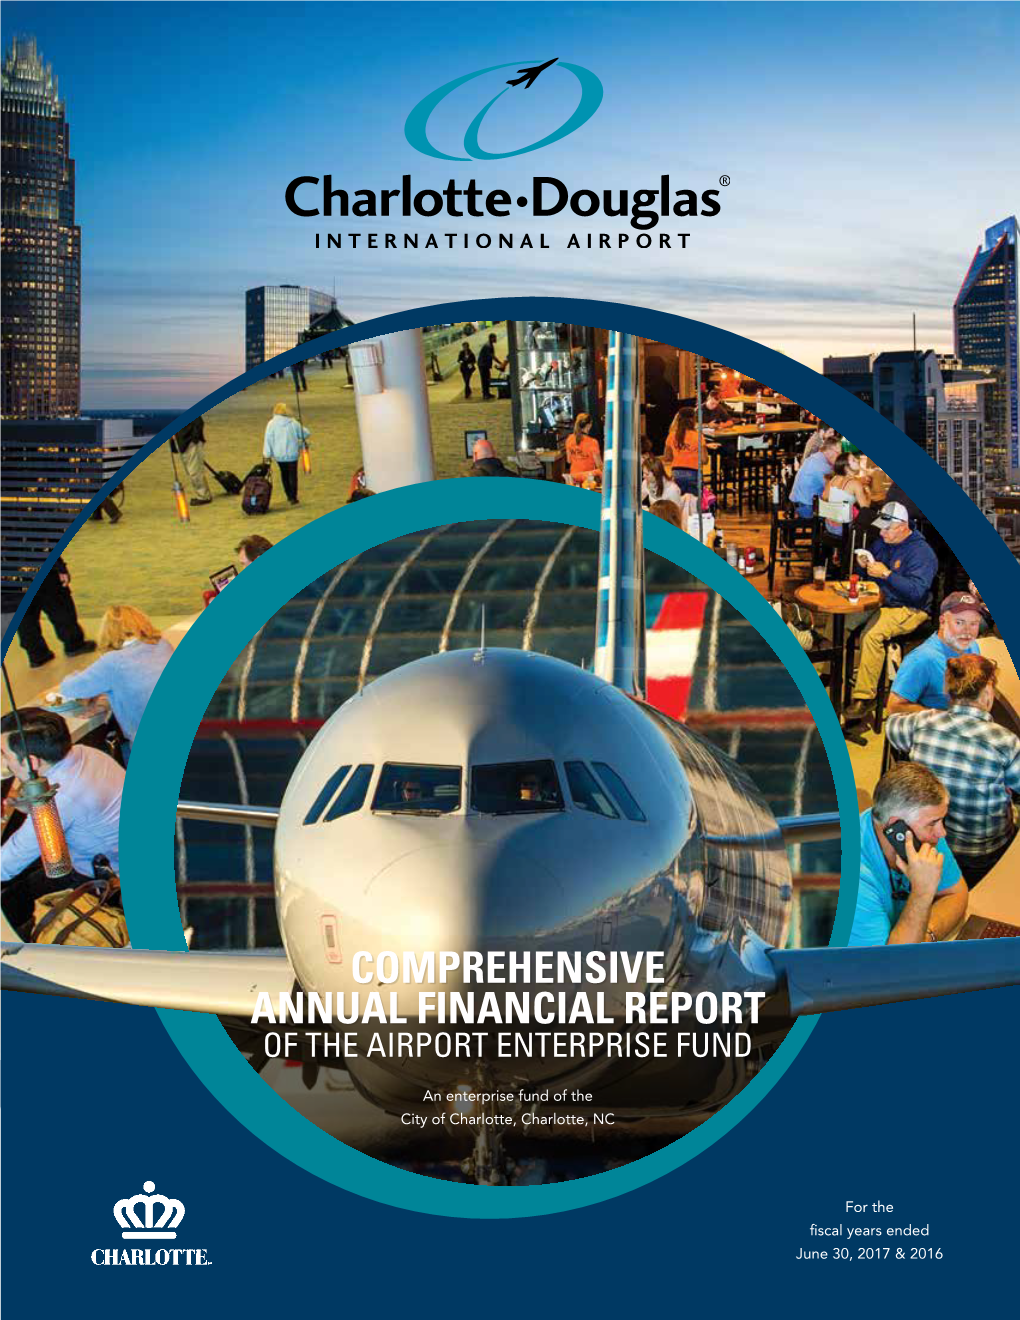 Comprehensive Annual Financial Report of the Airport Enterprise Fund